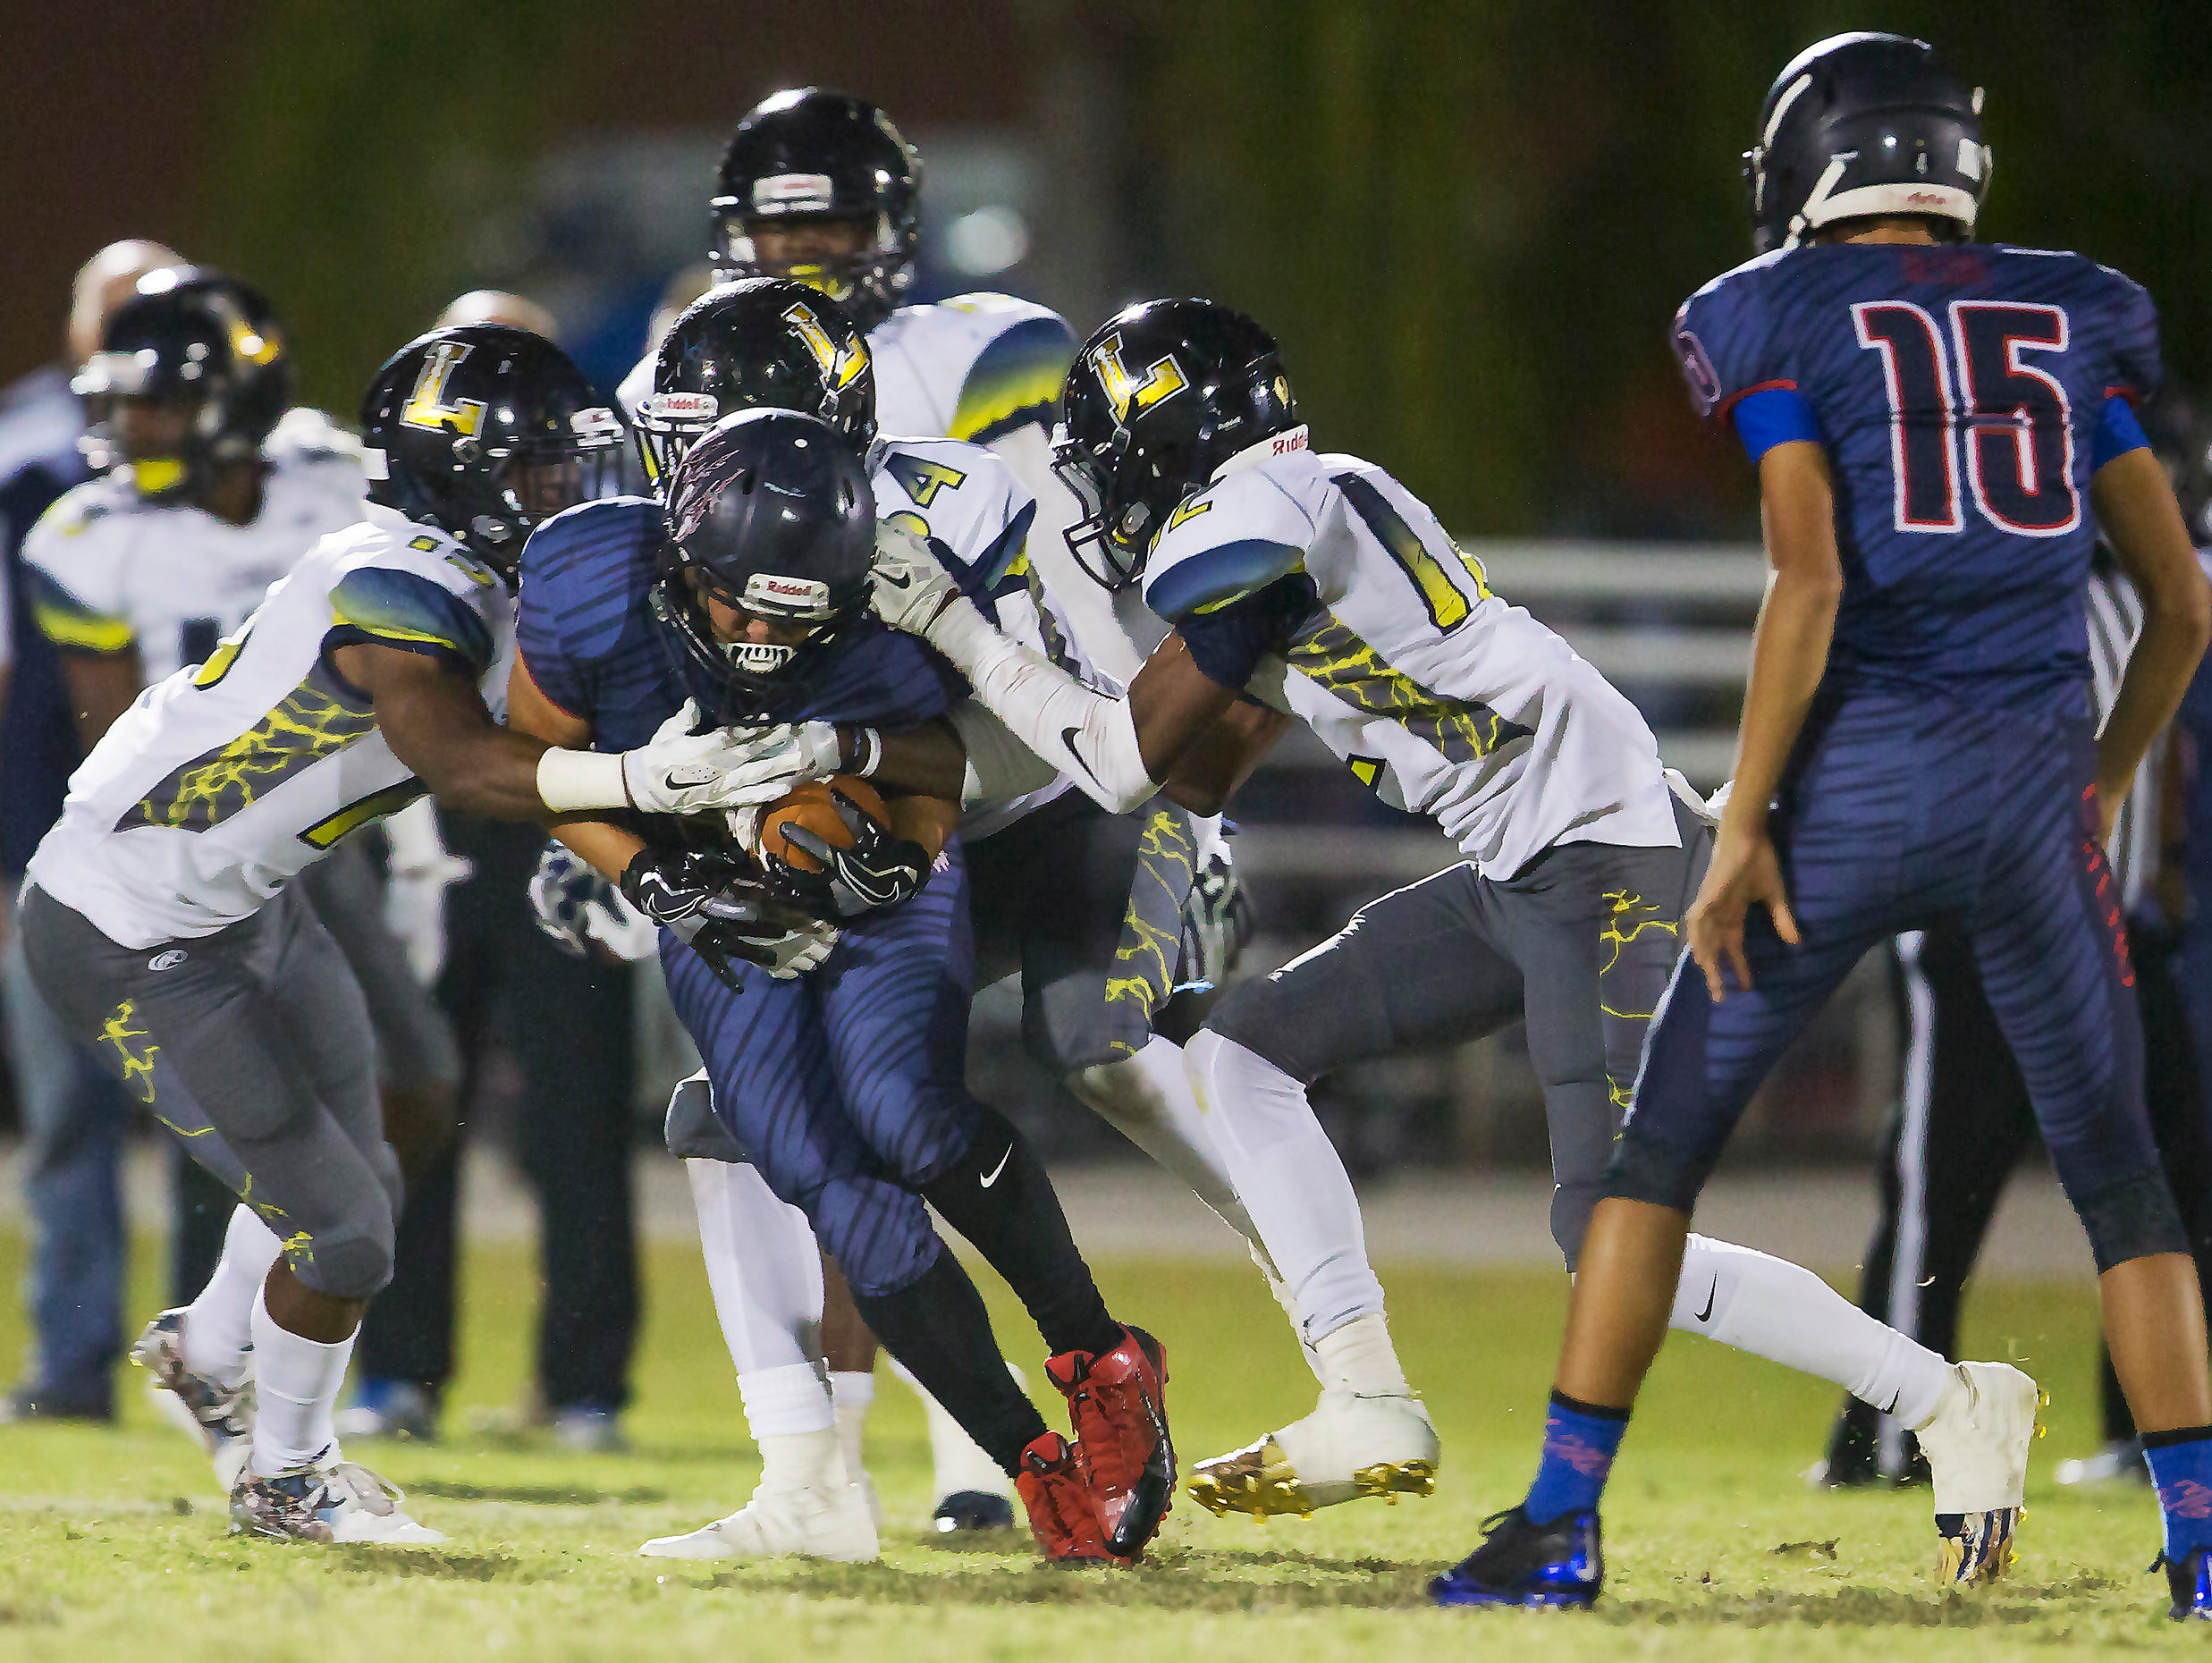 Lehigh Senior High School defenders tackle Estero’s Justin Lopez for a loss during second quarter play on Friday at Estero High School.